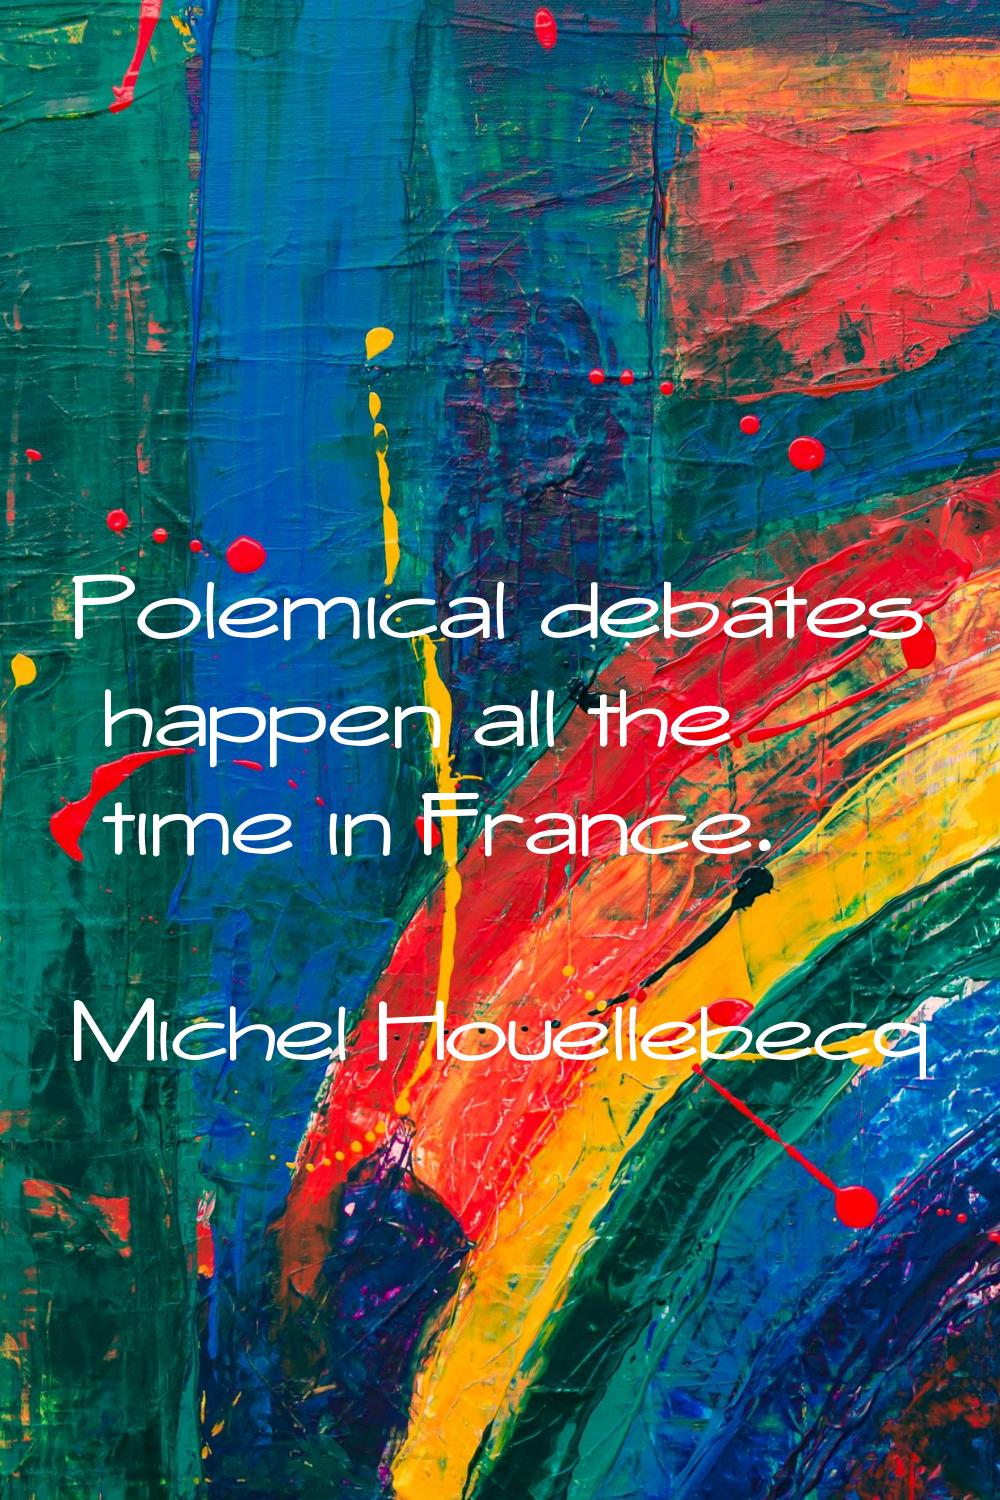 Polemical debates happen all the time in France.